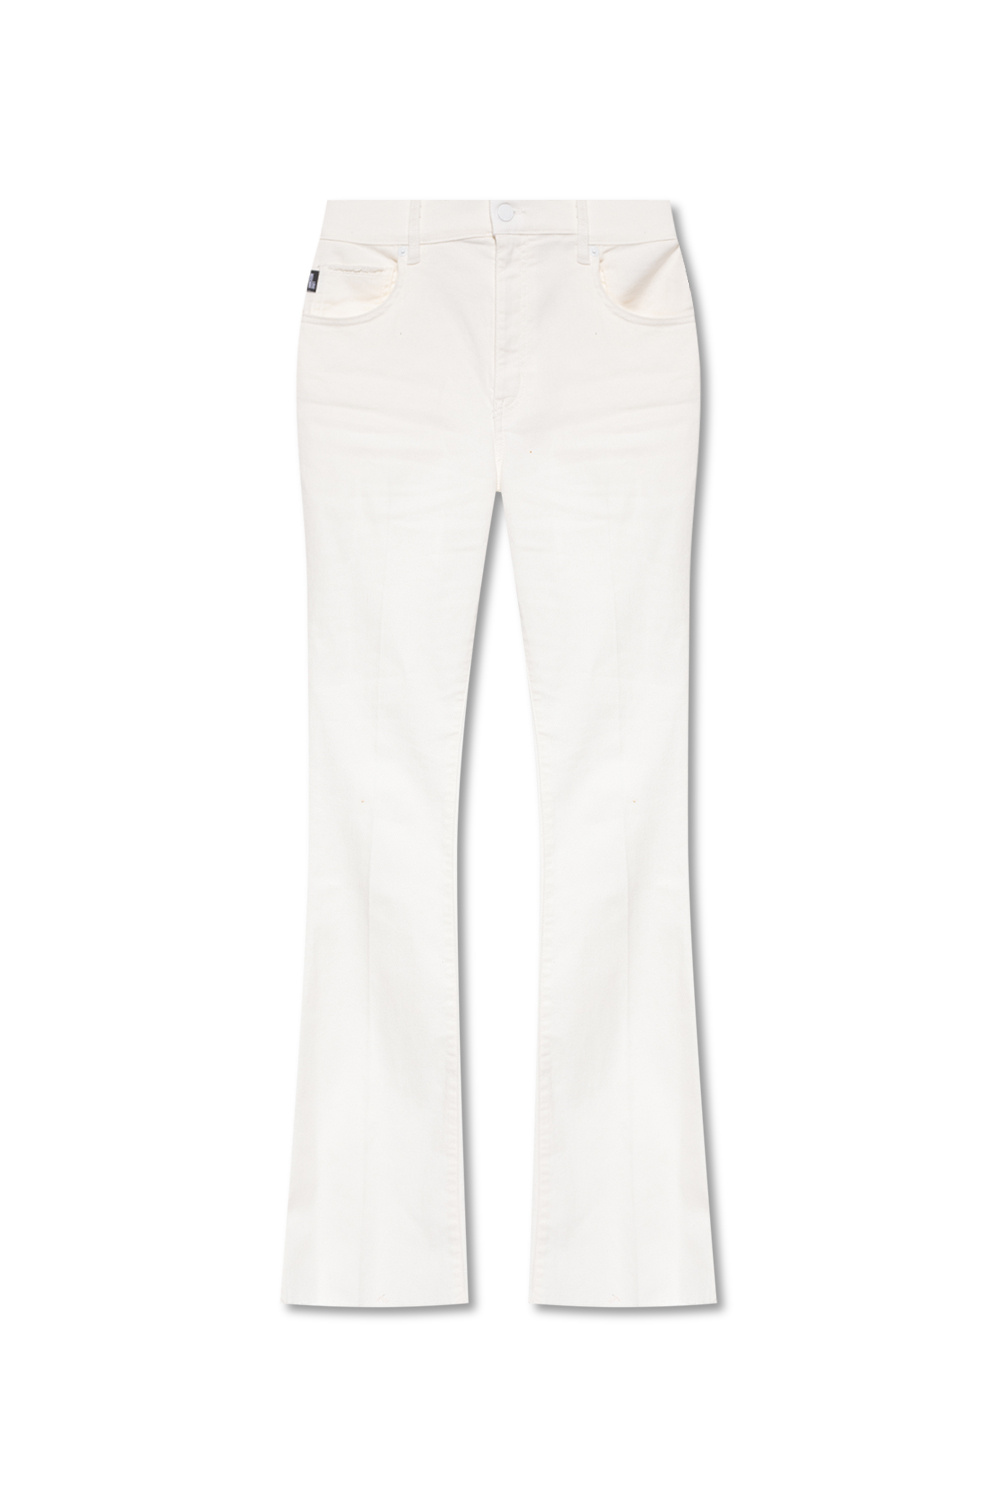 Love Moschino Flared trousers